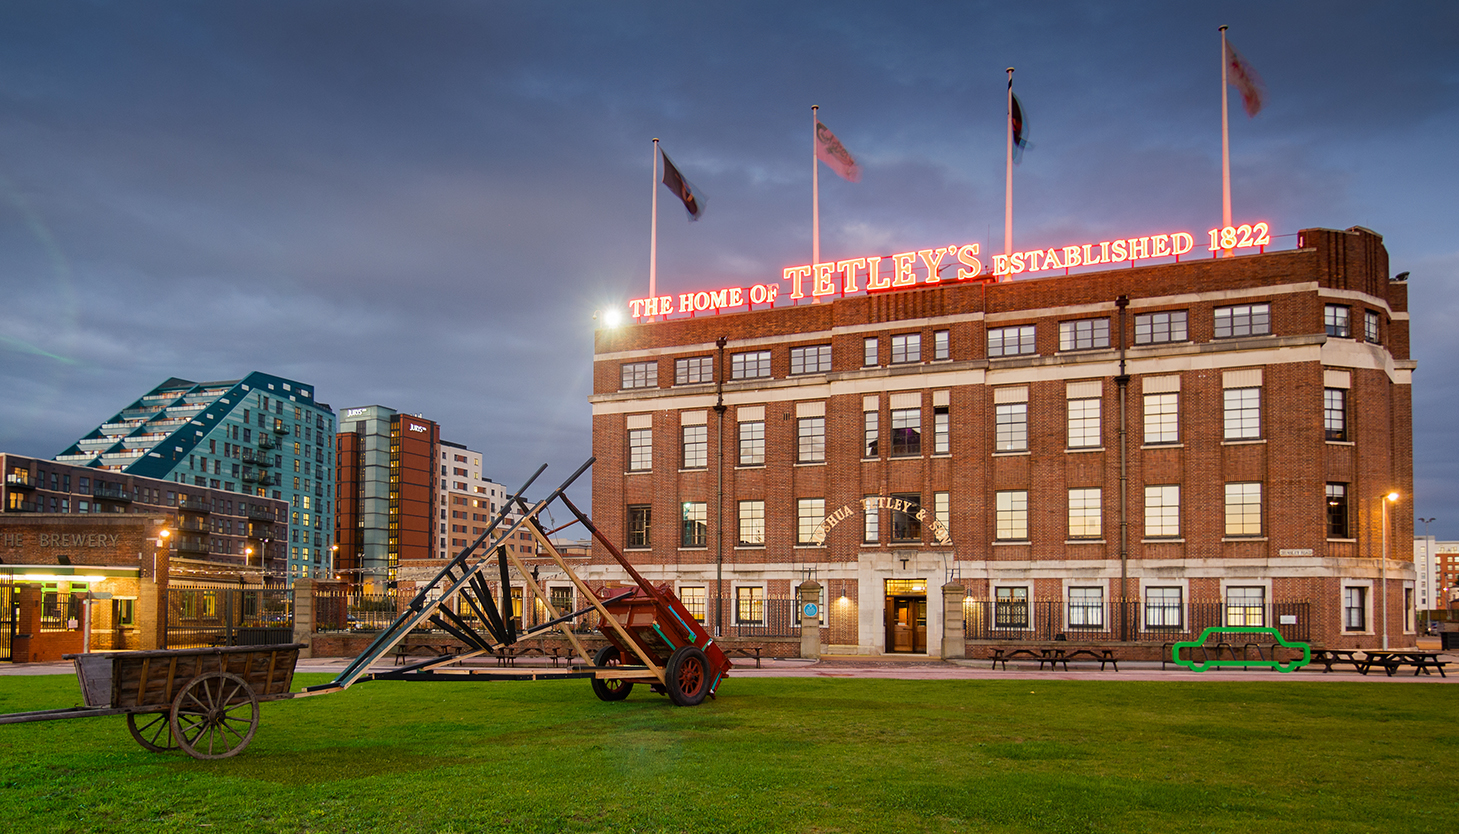 Industrial Heritage Meets Artistic Legacy at The Tetley